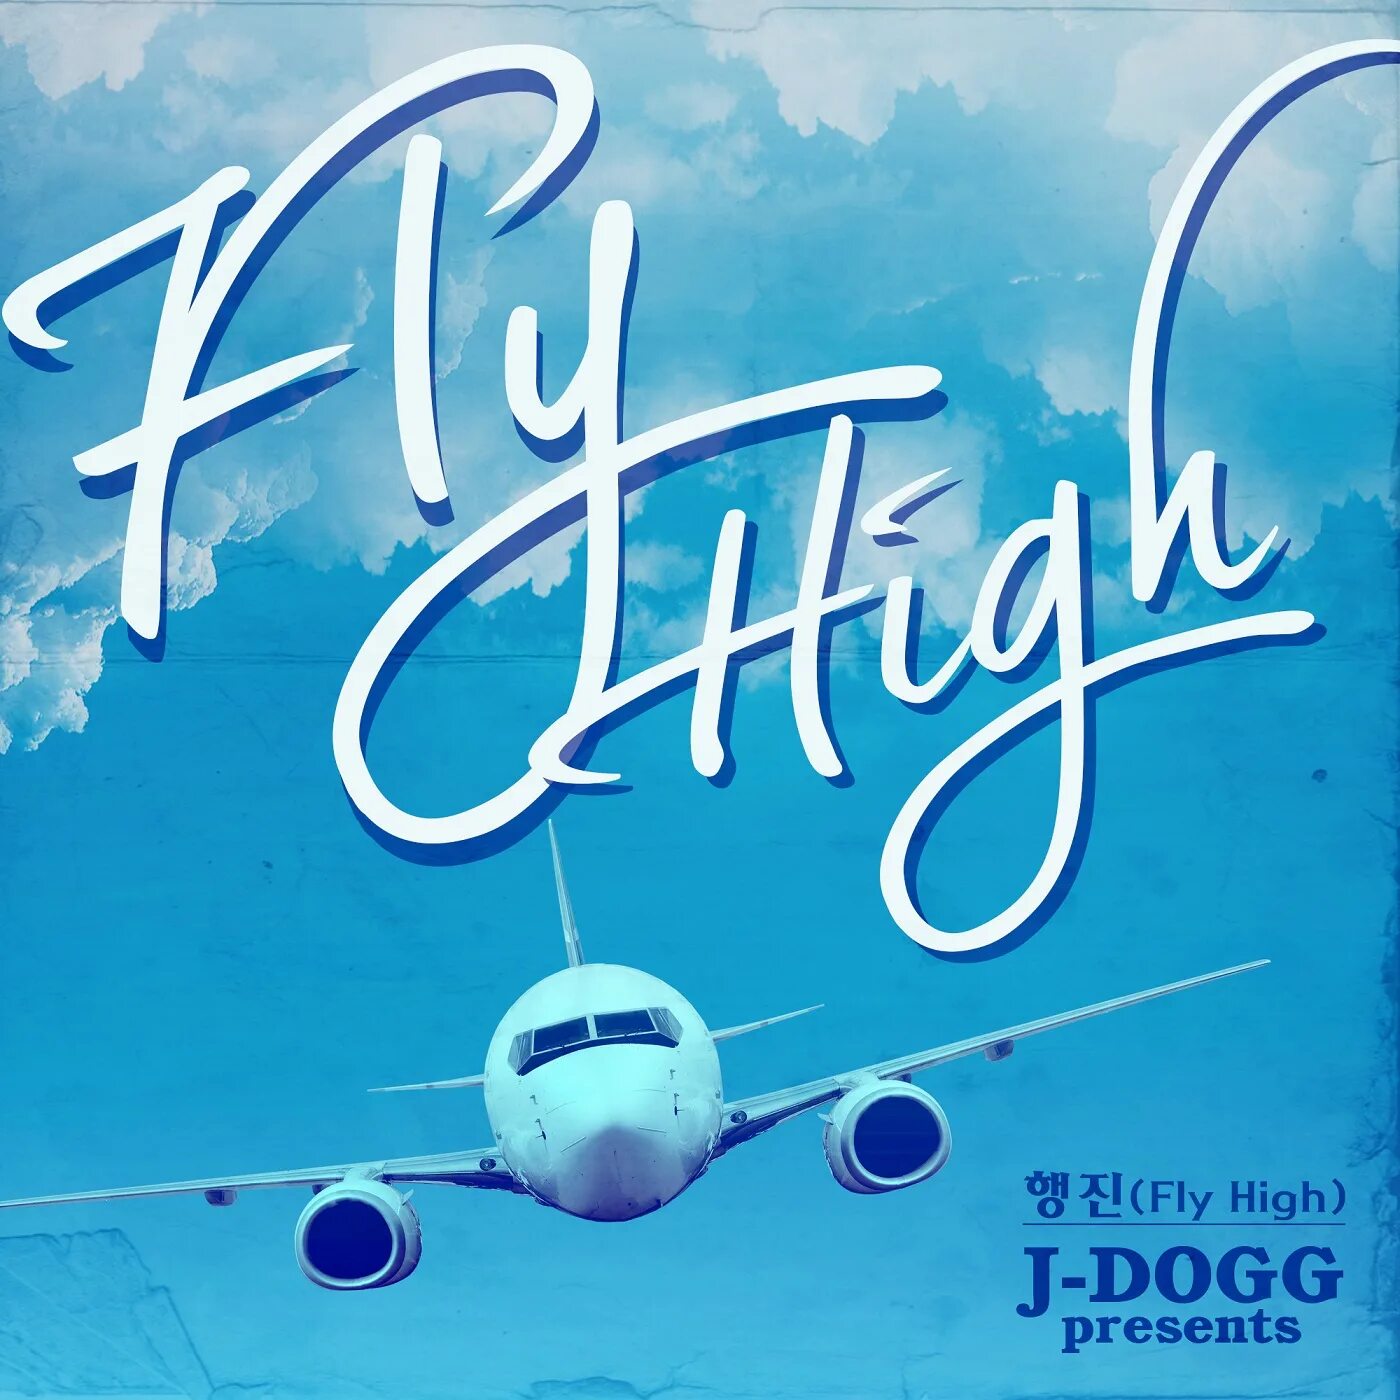 Fly high review. Fly High. Fly High activity book. Fly High 1. Fly High 2.